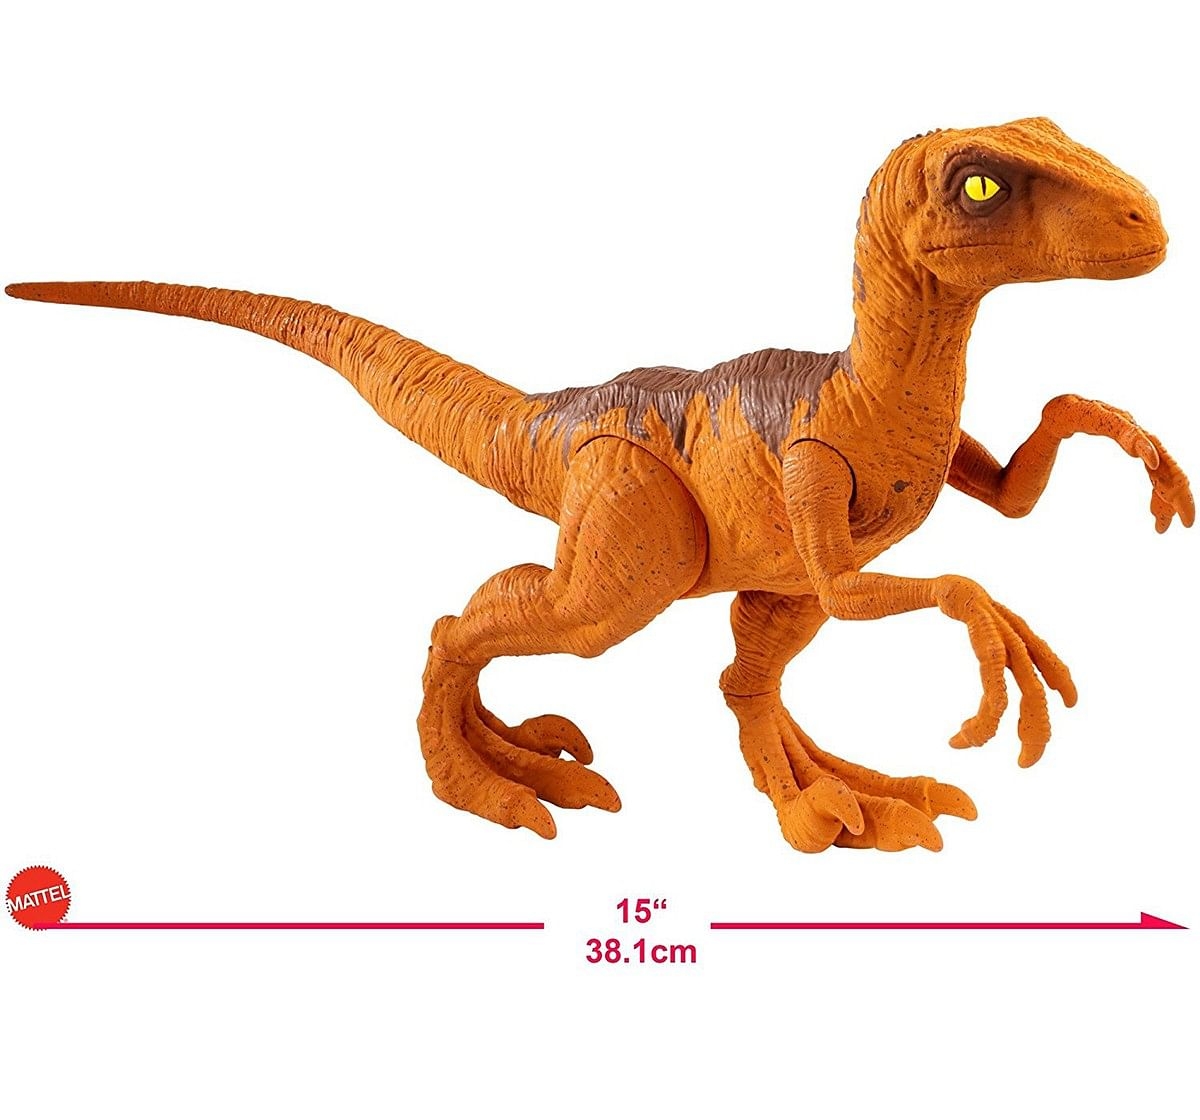 Jurassic World Action Figures Dino Action Figures for Boys age 3Y+, Assorted